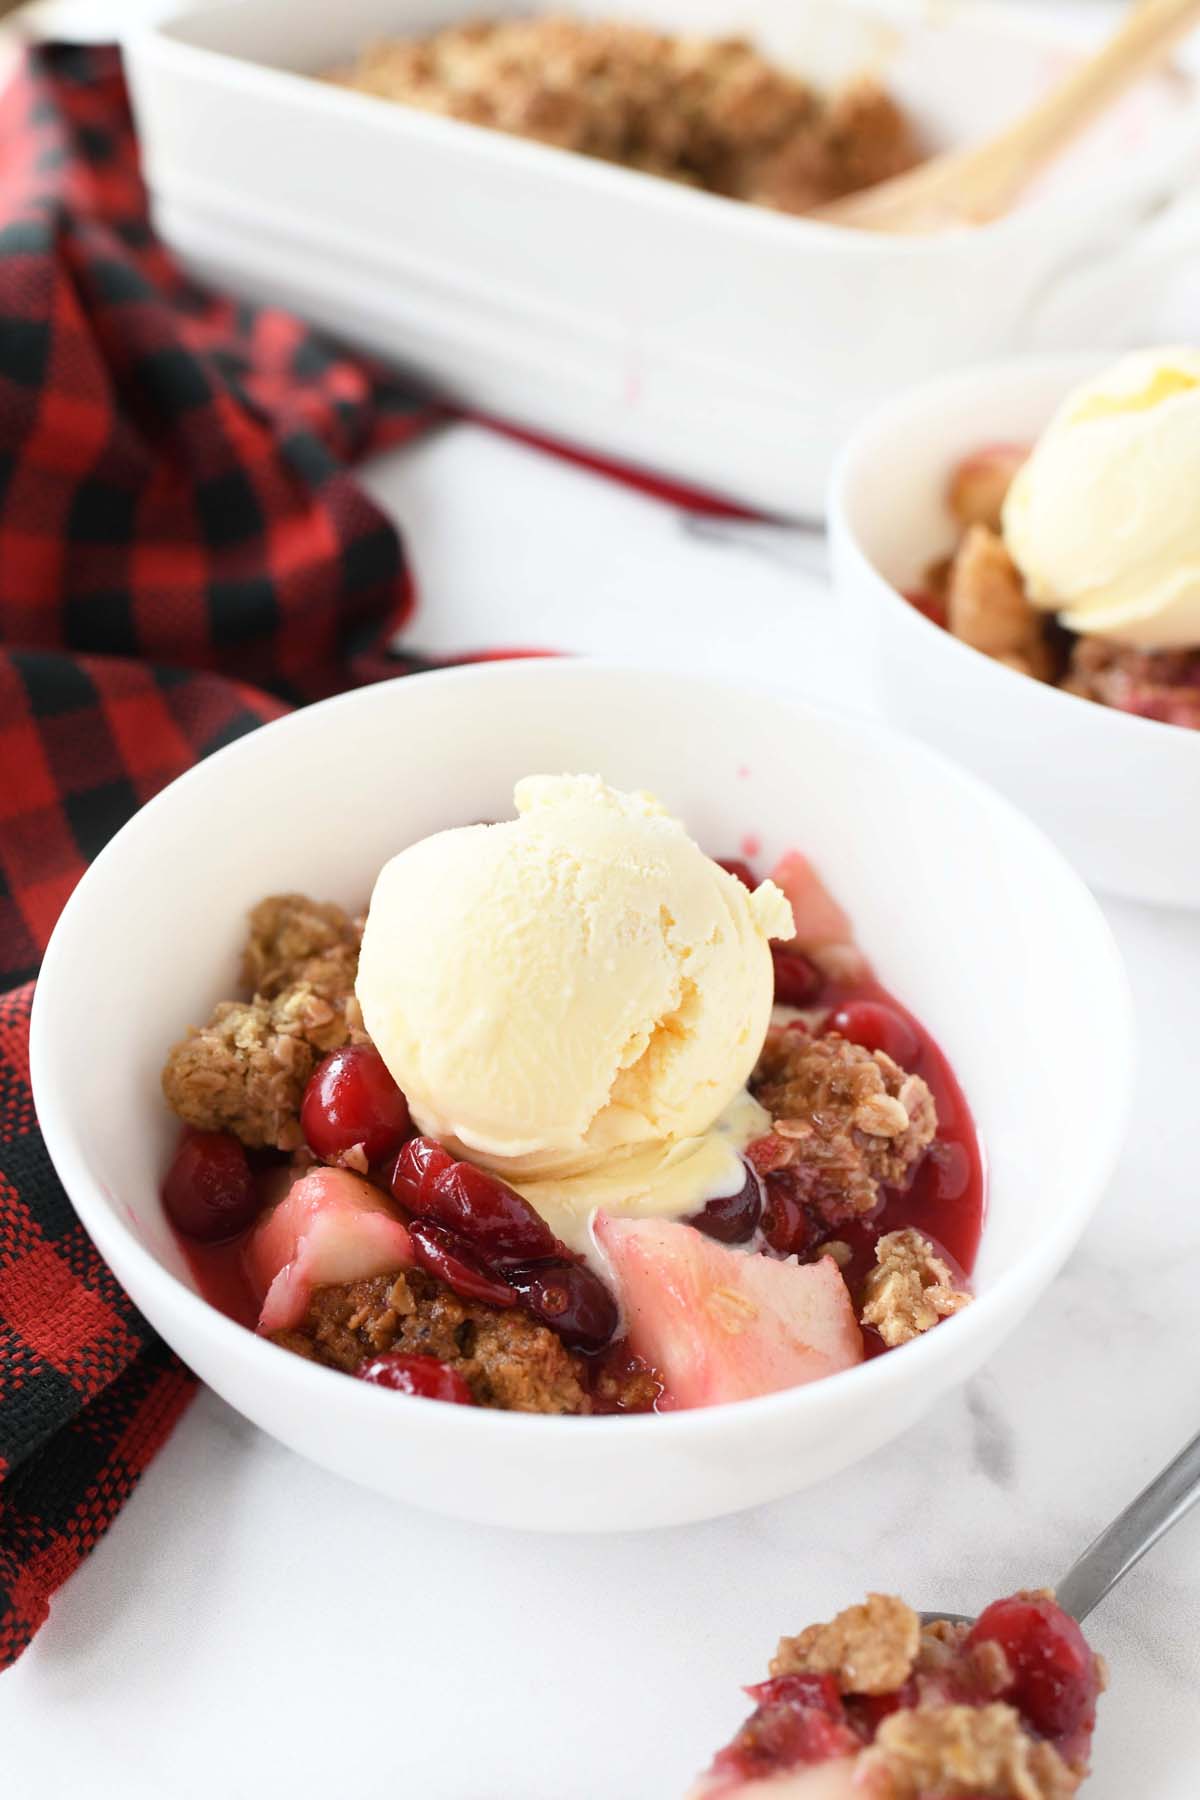 Pear cranberry crisp with a dollop of vanilla ice cream on top.